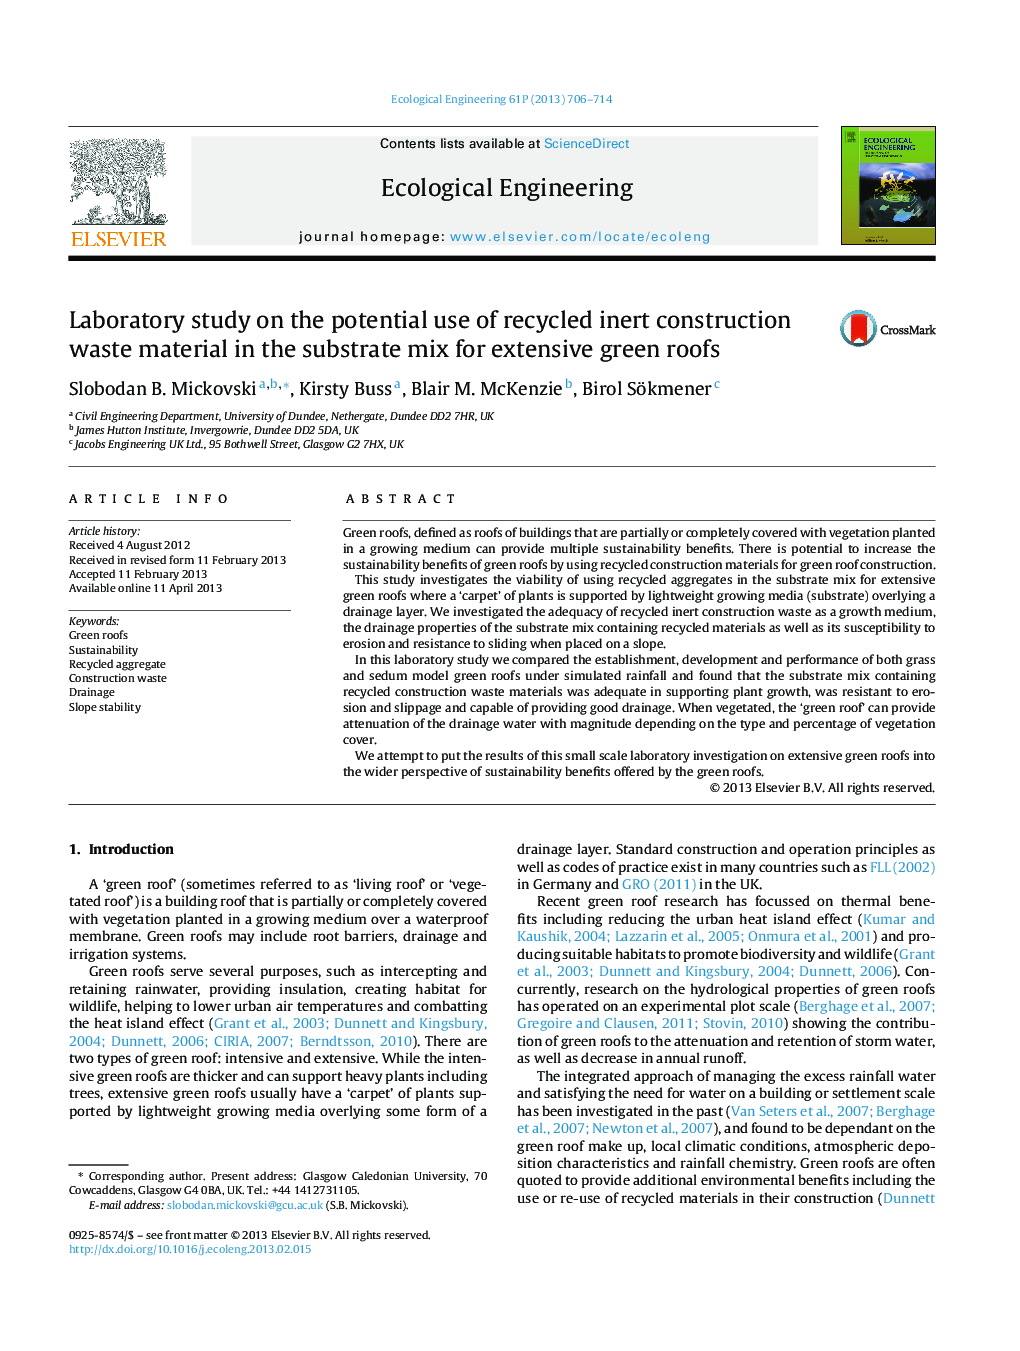 Laboratory study on the potential use of recycled inert construction waste material in the substrate mix for extensive green roofs